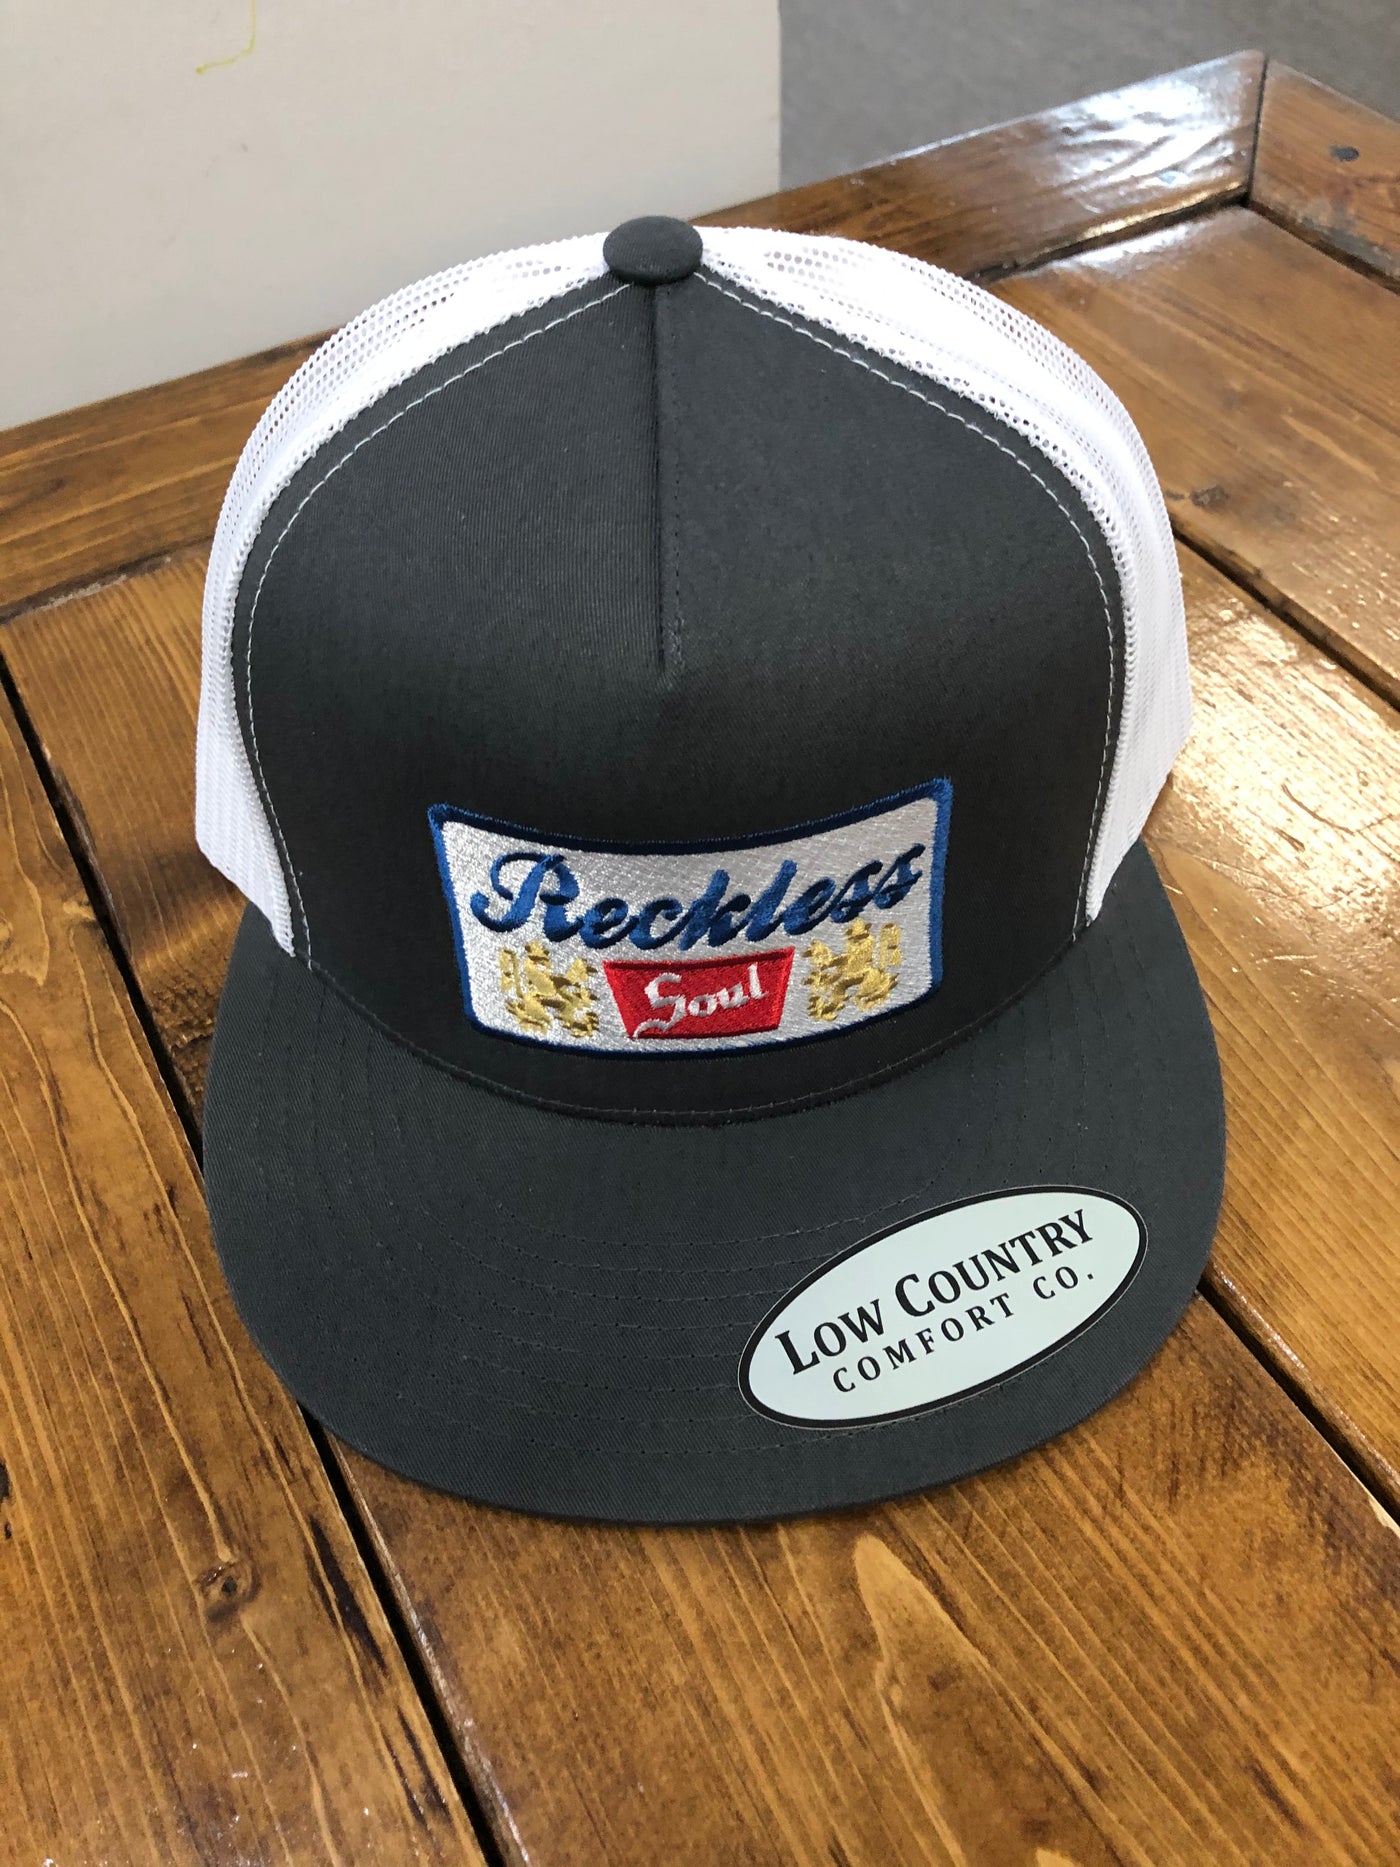 Low Country Comfort Co. Reckless Soul Coors Banquet Charcoal/White Hat